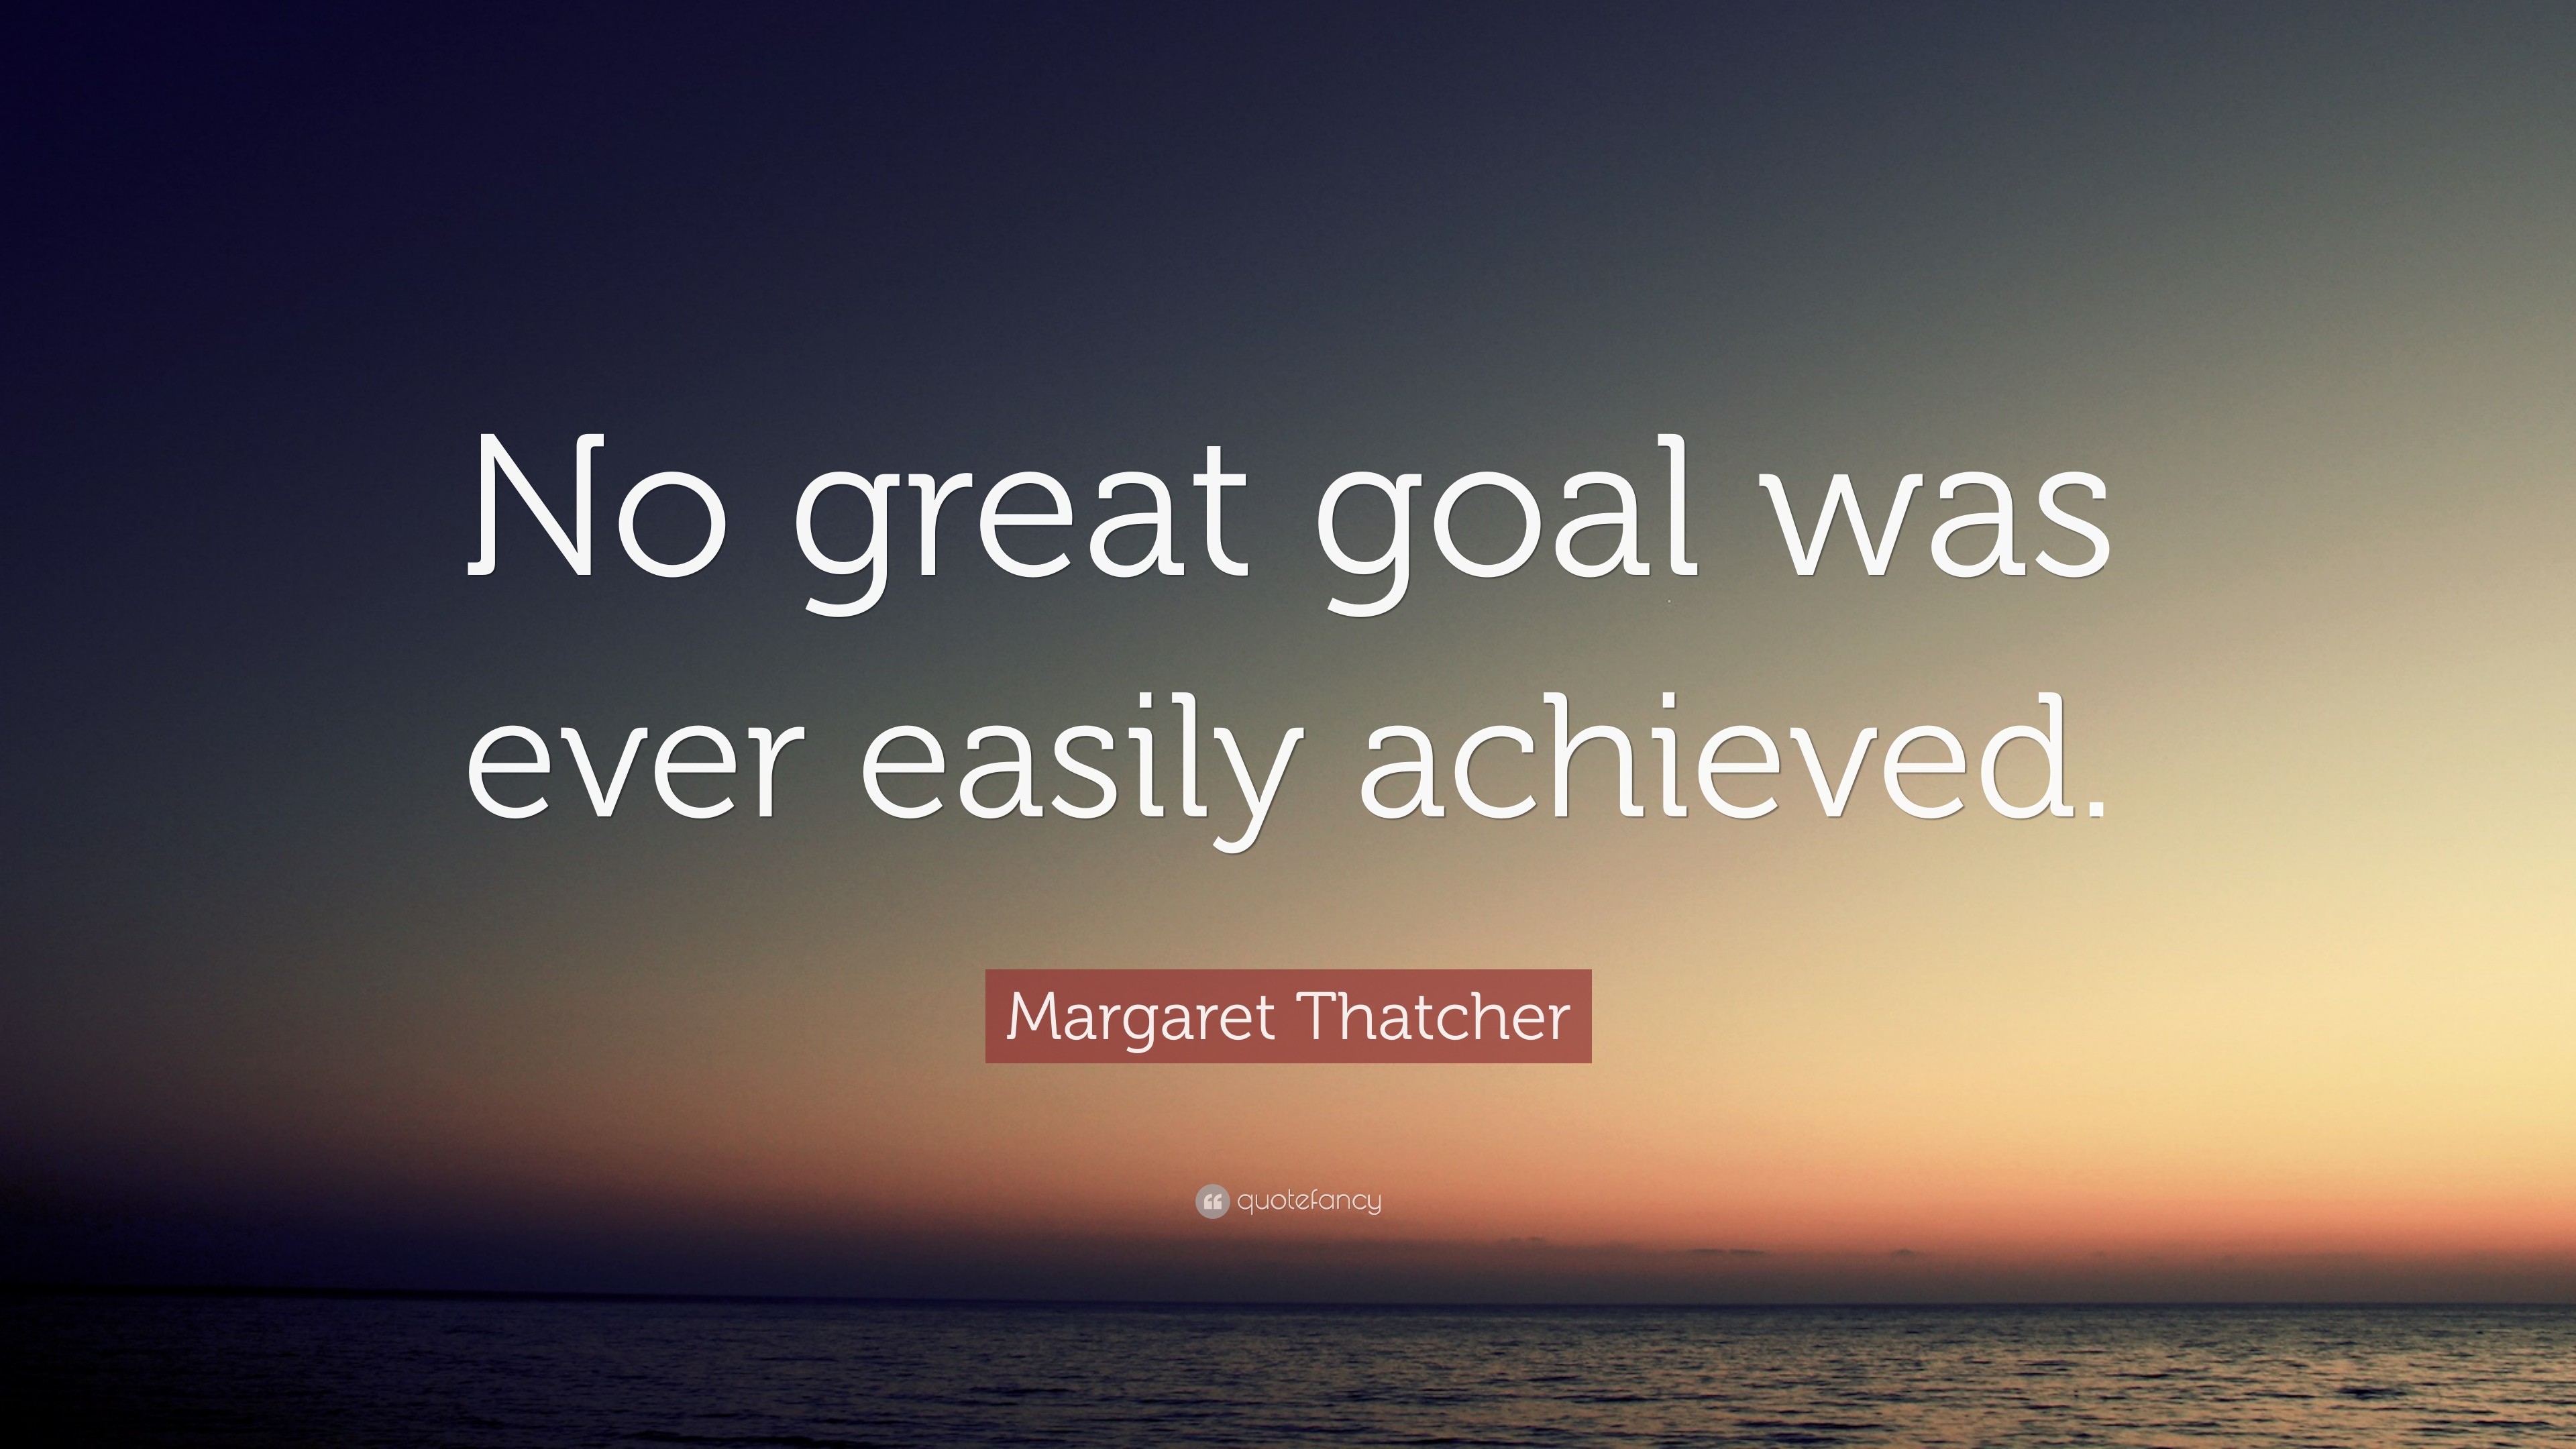 3840x2160 Margaret Thatcher Quote: “No great goal was ever easily achieved.”